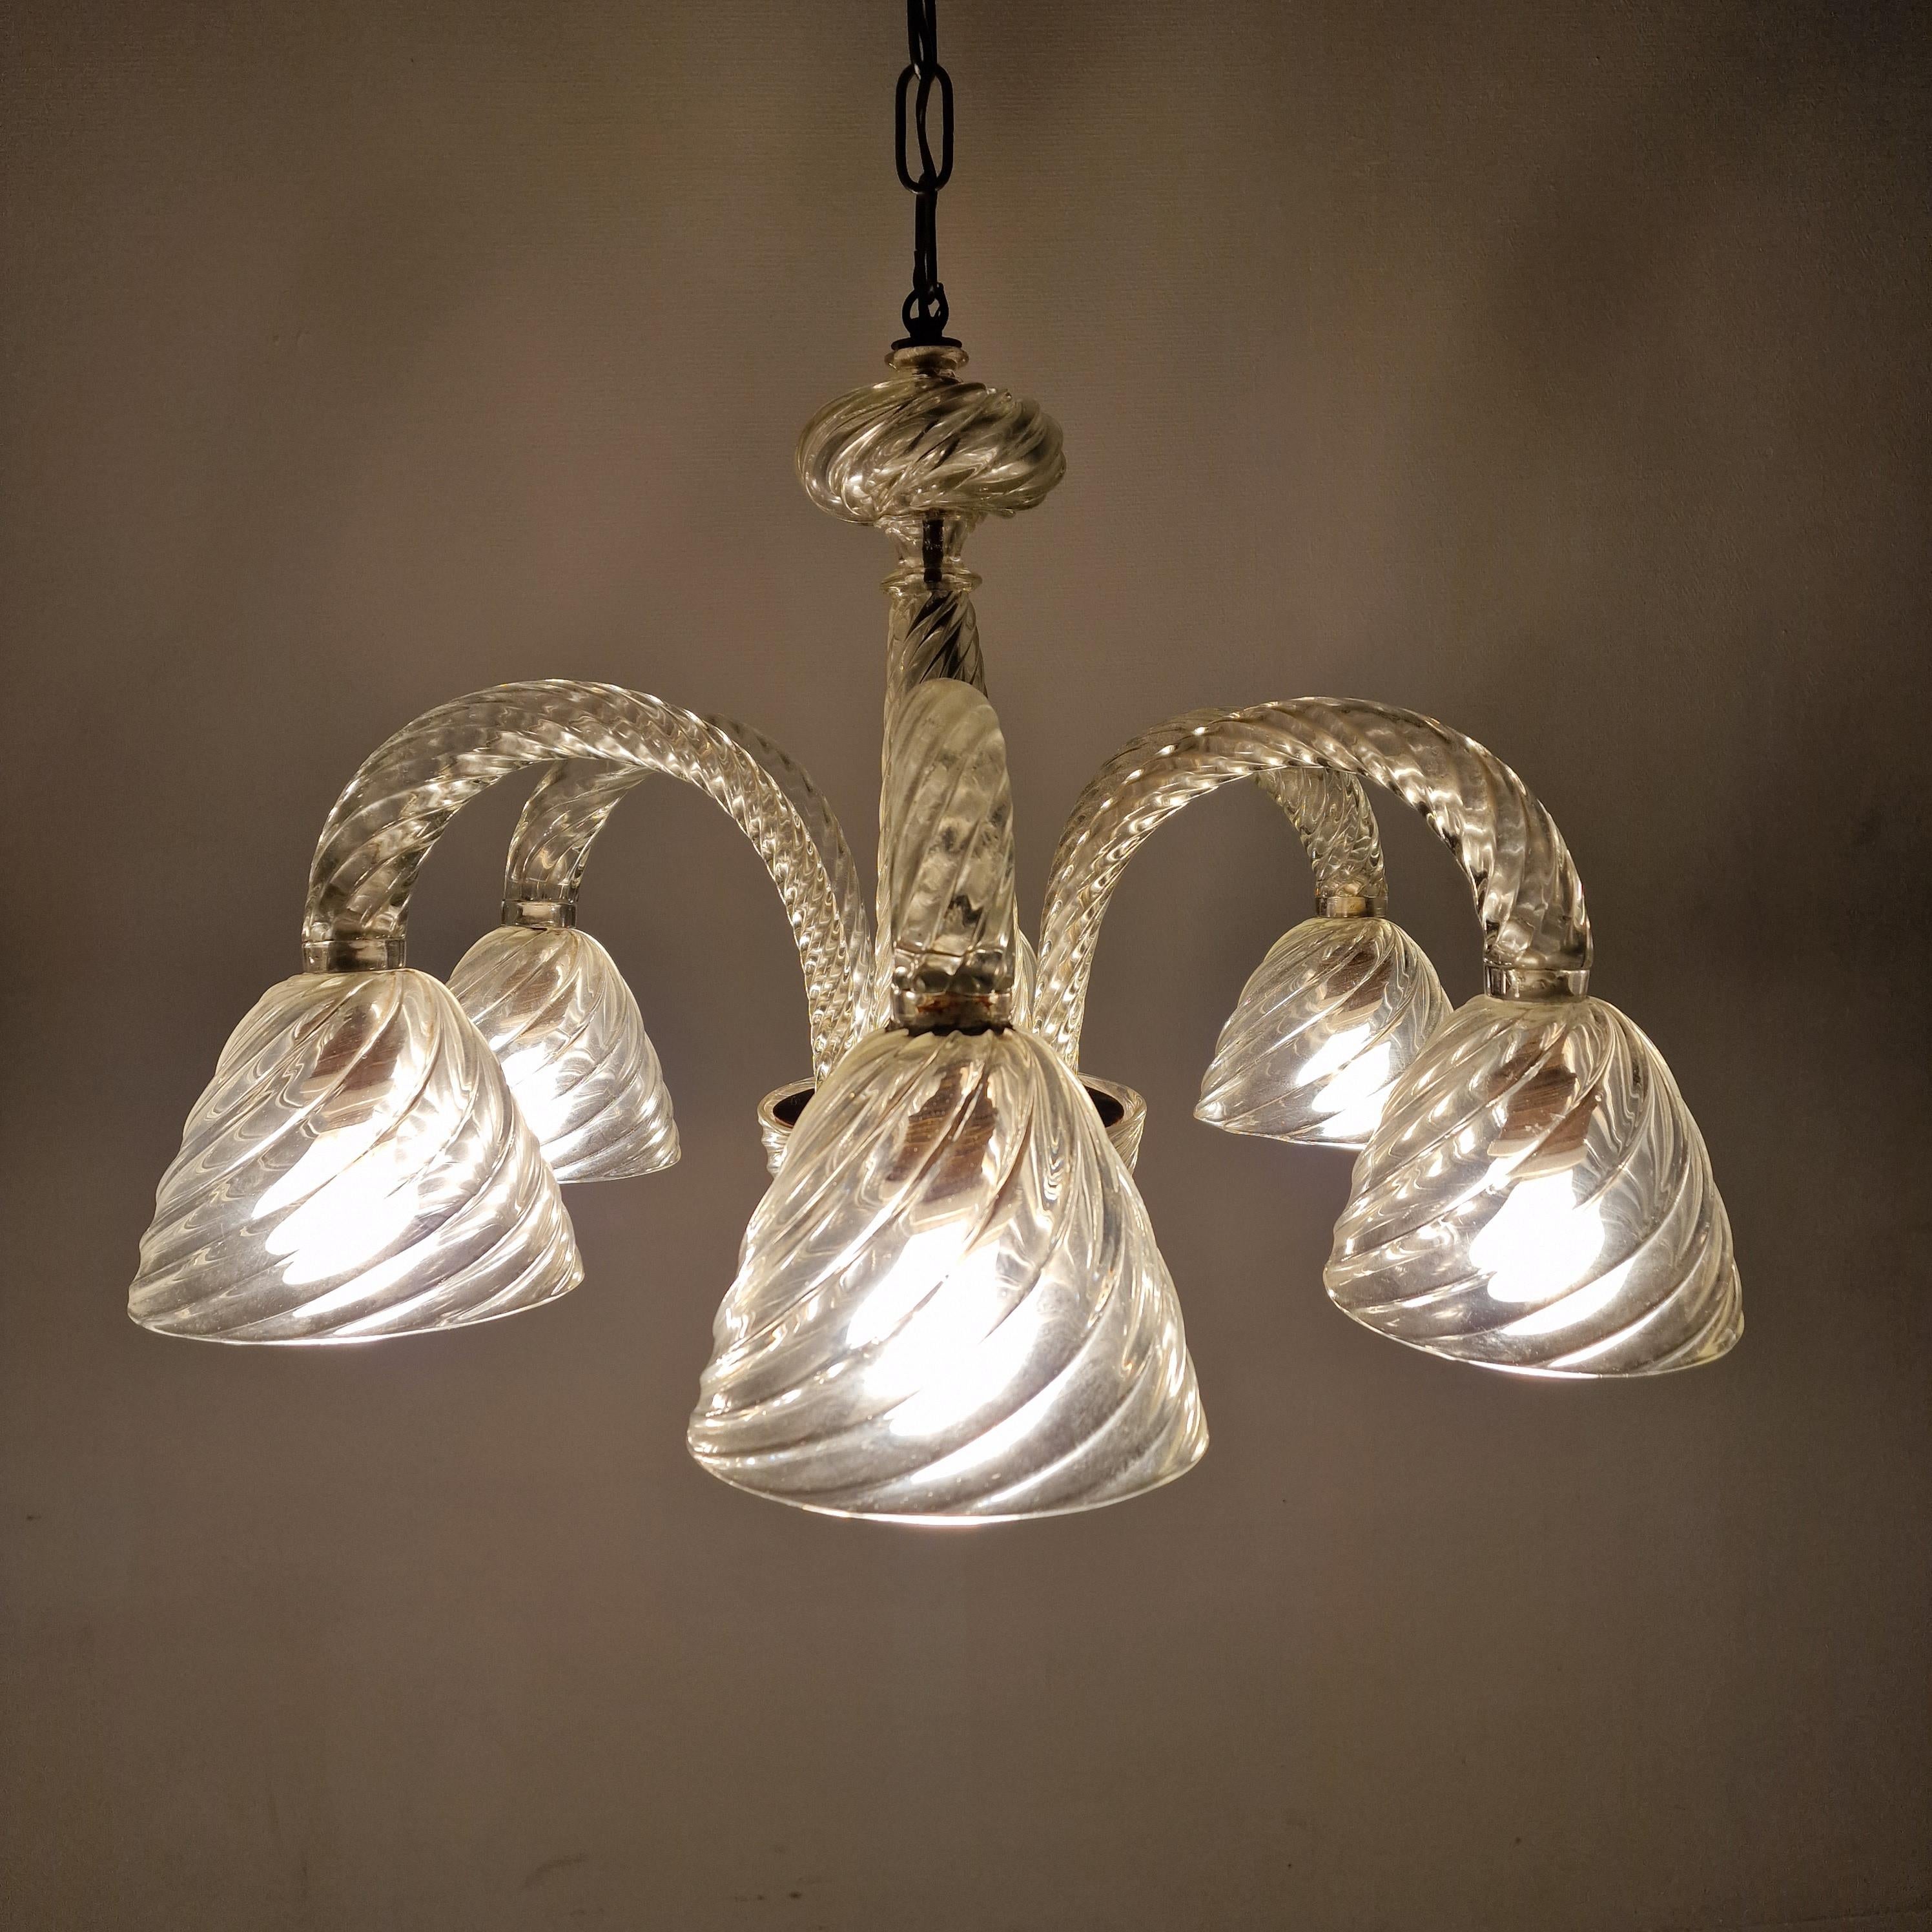 Hand-Crafted Barovier & Toso Murano Glass Chandelier, Italy 1950's For Sale